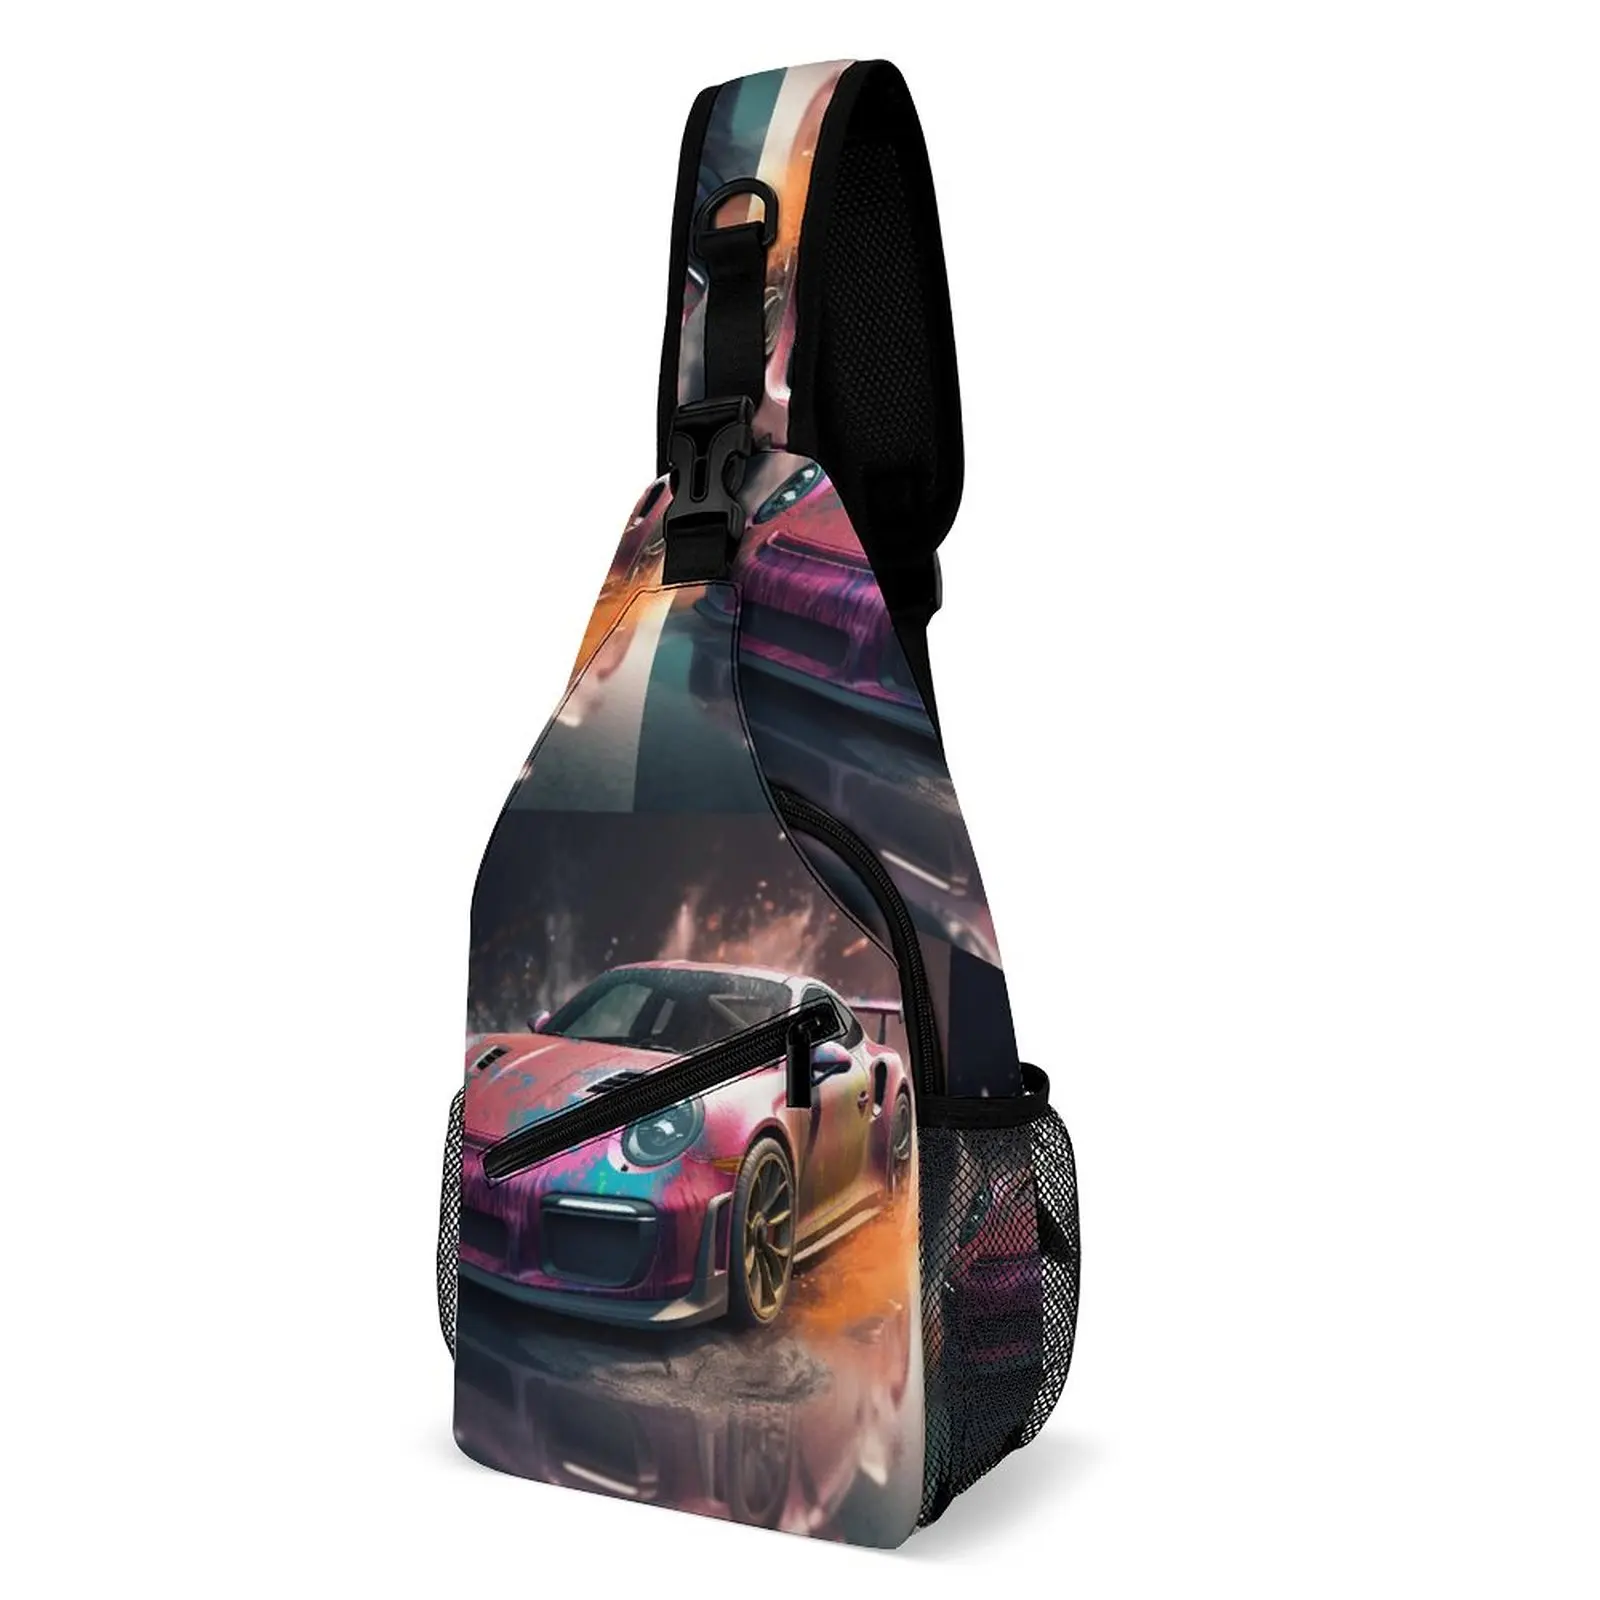 

Classic Sports Car Shoulder Bags Liquid Splash Explosion Chest Bag University Motorcycle Sling Bag Outdoor Graphic Small Bags